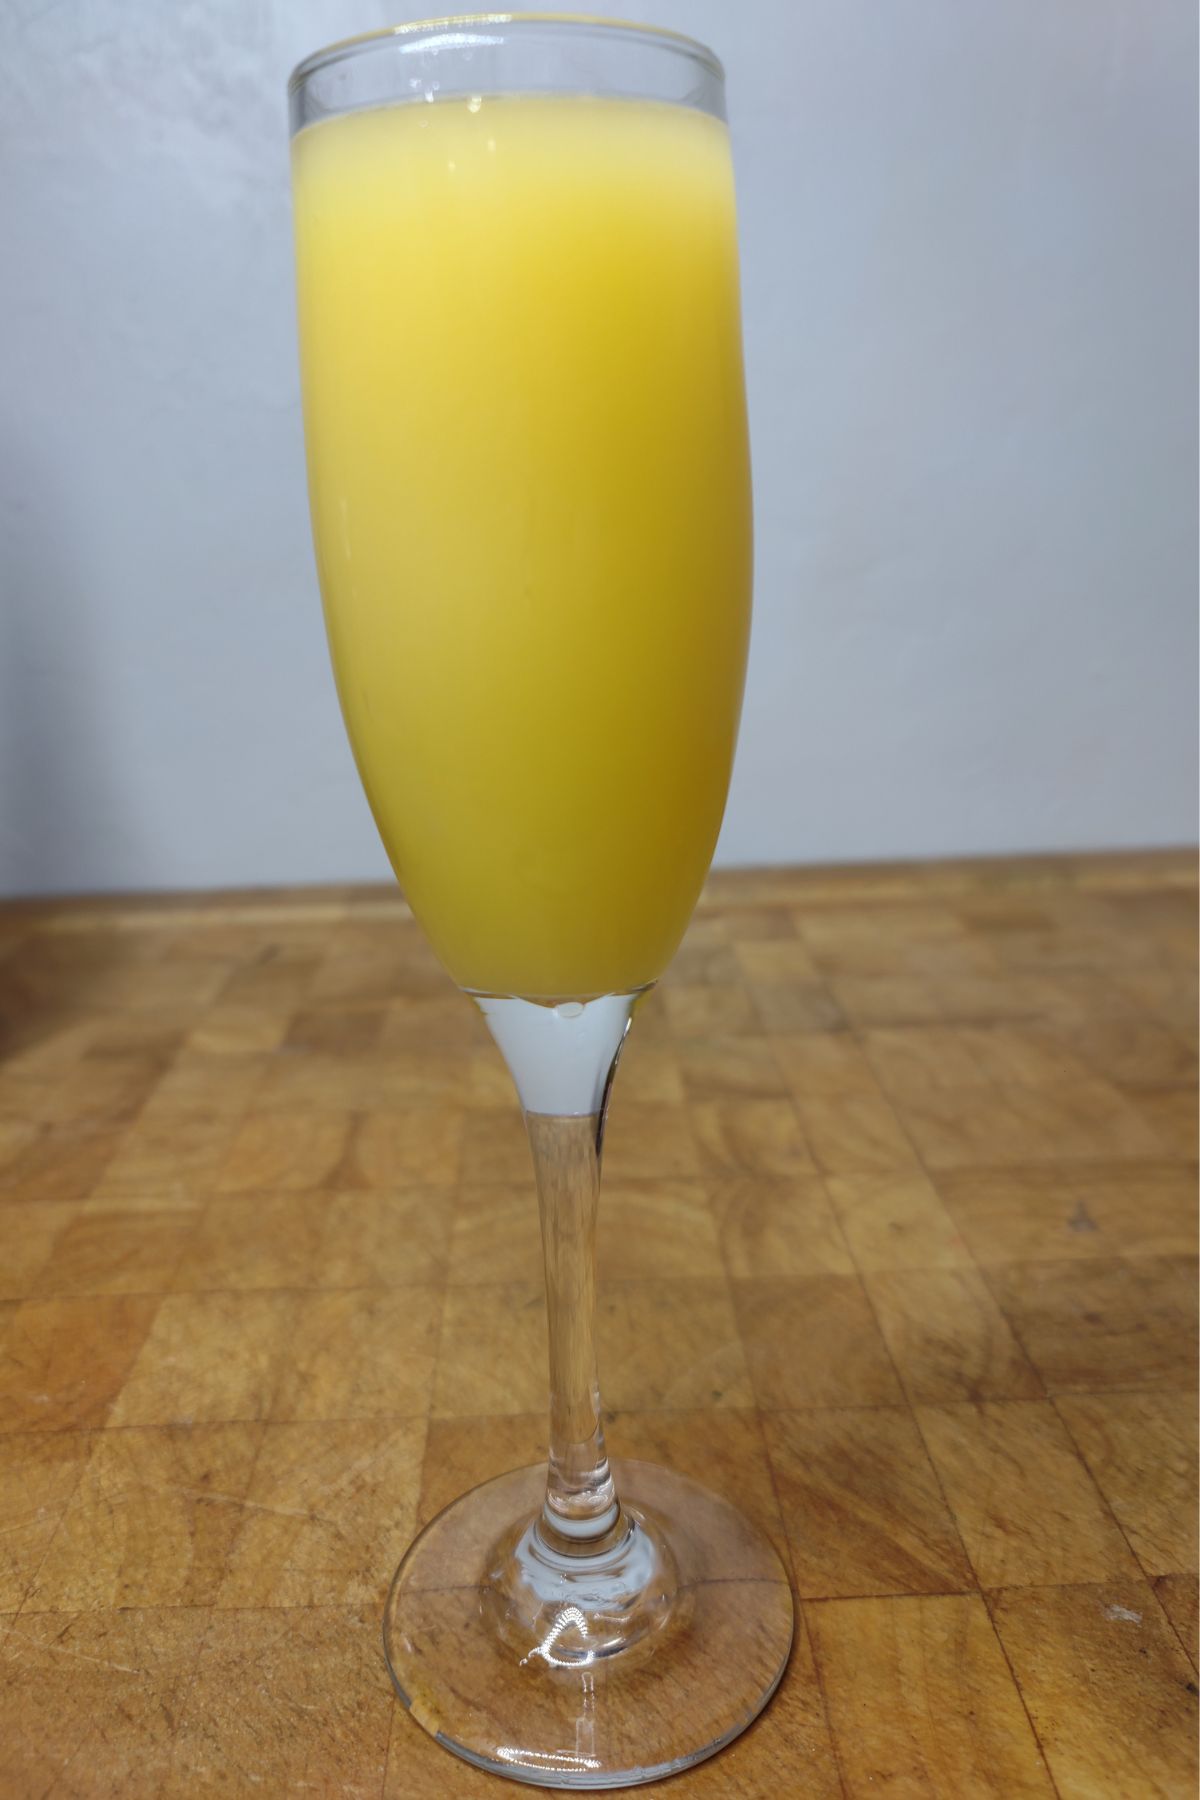 Orange creamsicle mimosa on a wooden table.